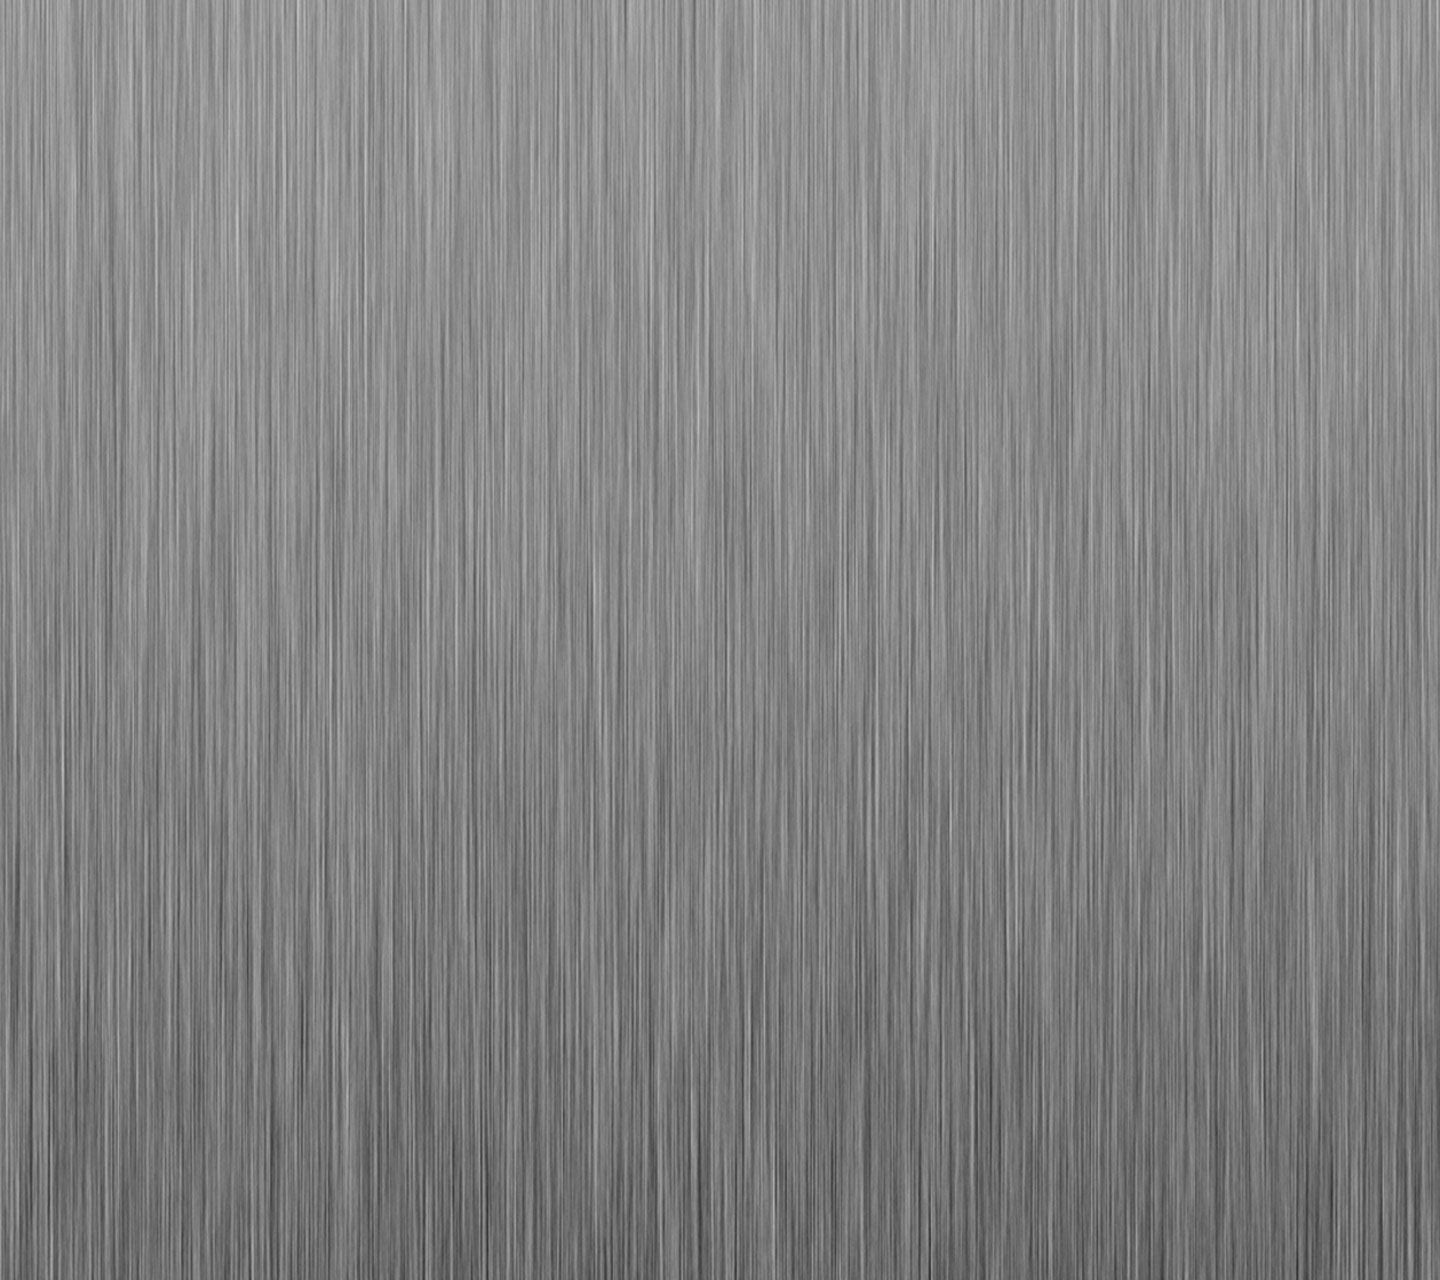 Stainless Steel Wallpaper Free Stainless Steel Background